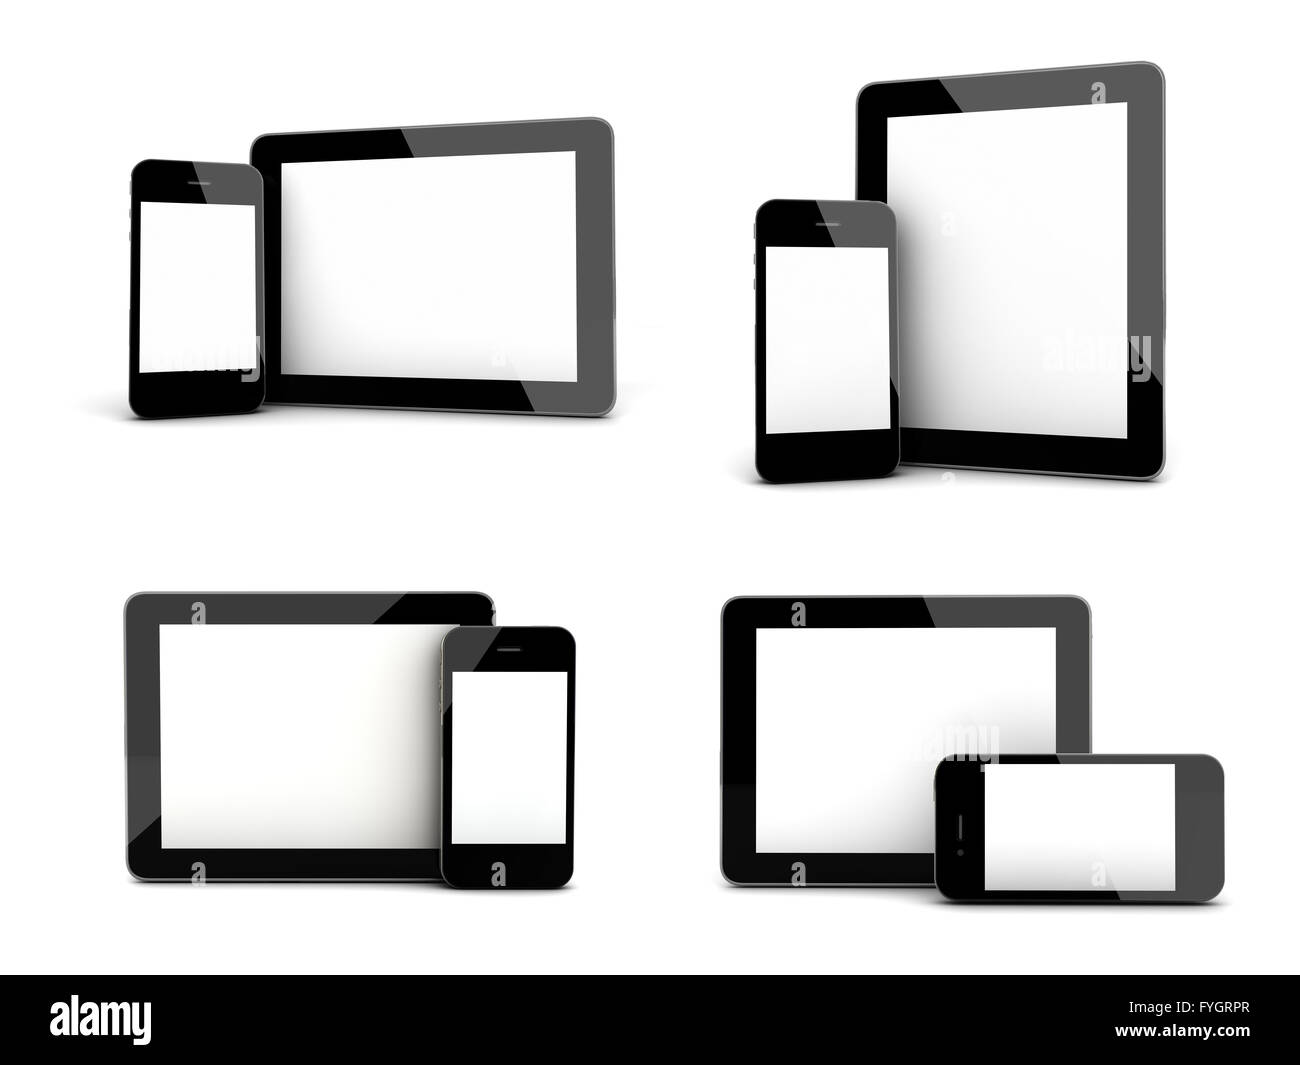 some blank devices in a collage, mockup use Stock Photo